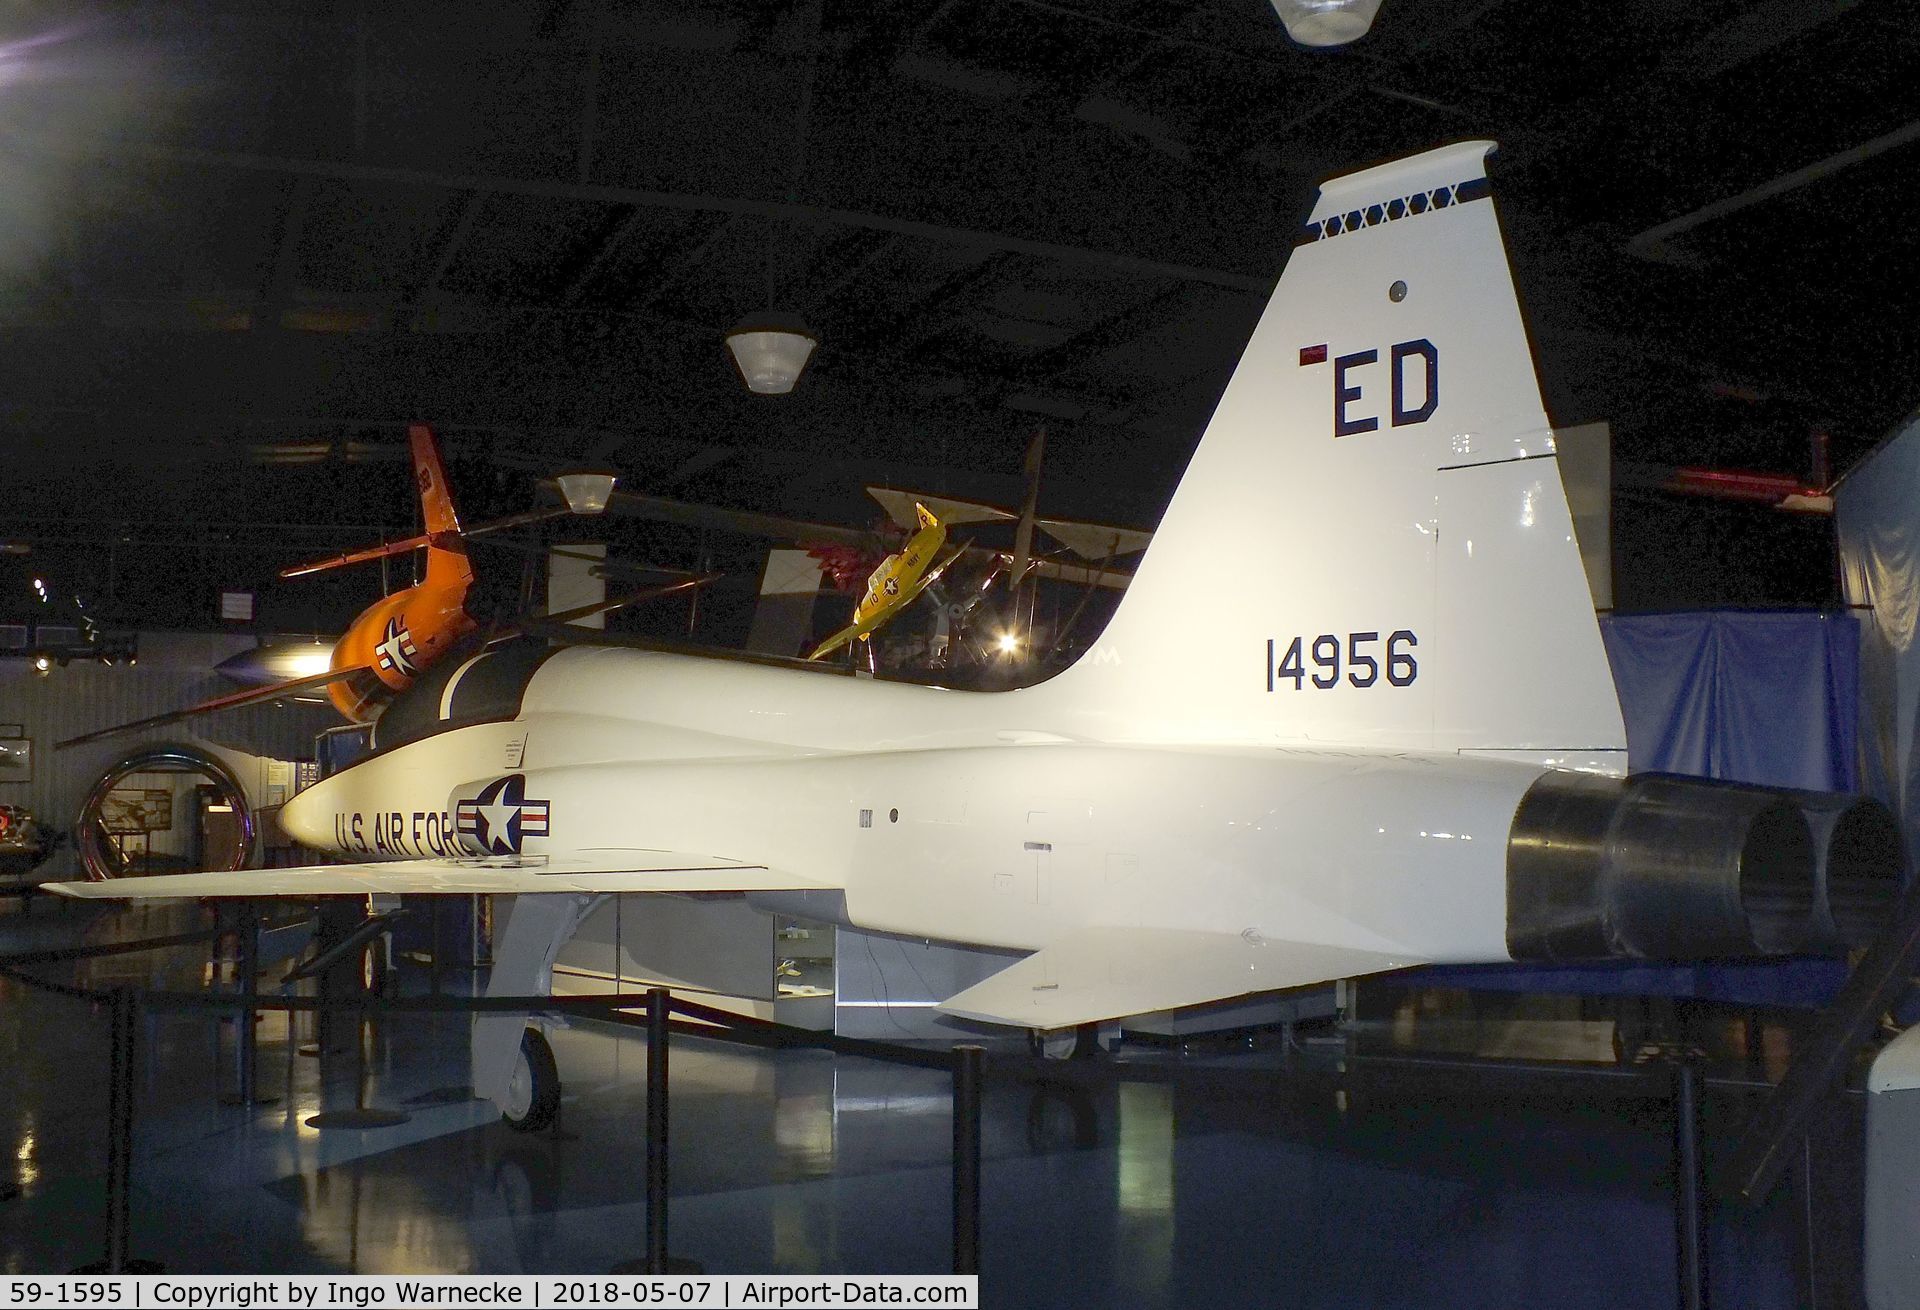 59-1595, Northrop T-38A Talon C/N N.5108, Northrop T-38A Talon, displayed as '67-14956' at the Stafford Air & Space Museum, Weatherford OK